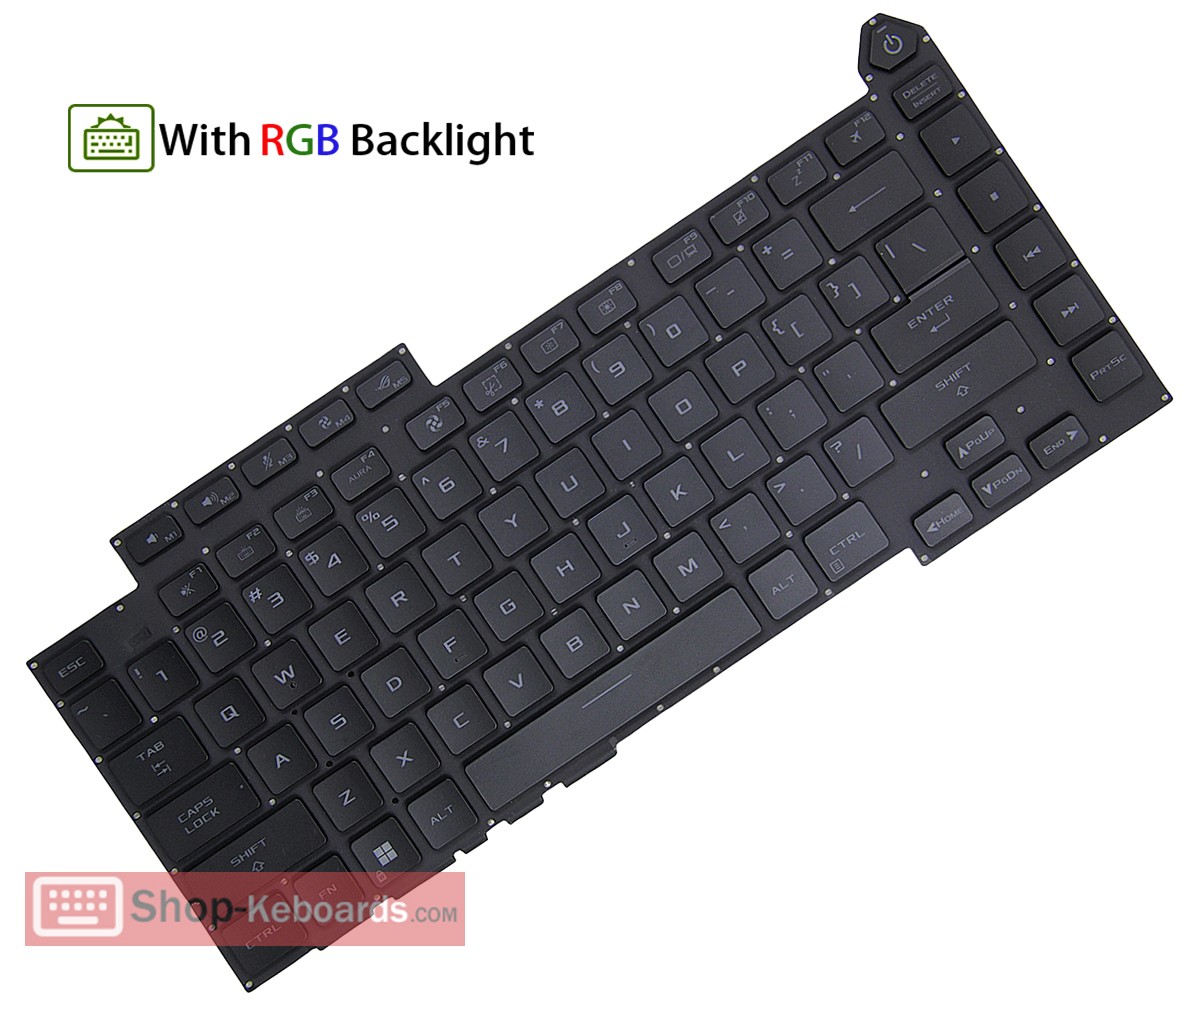 Asus 0KNR0-4814US00 Keyboard replacement